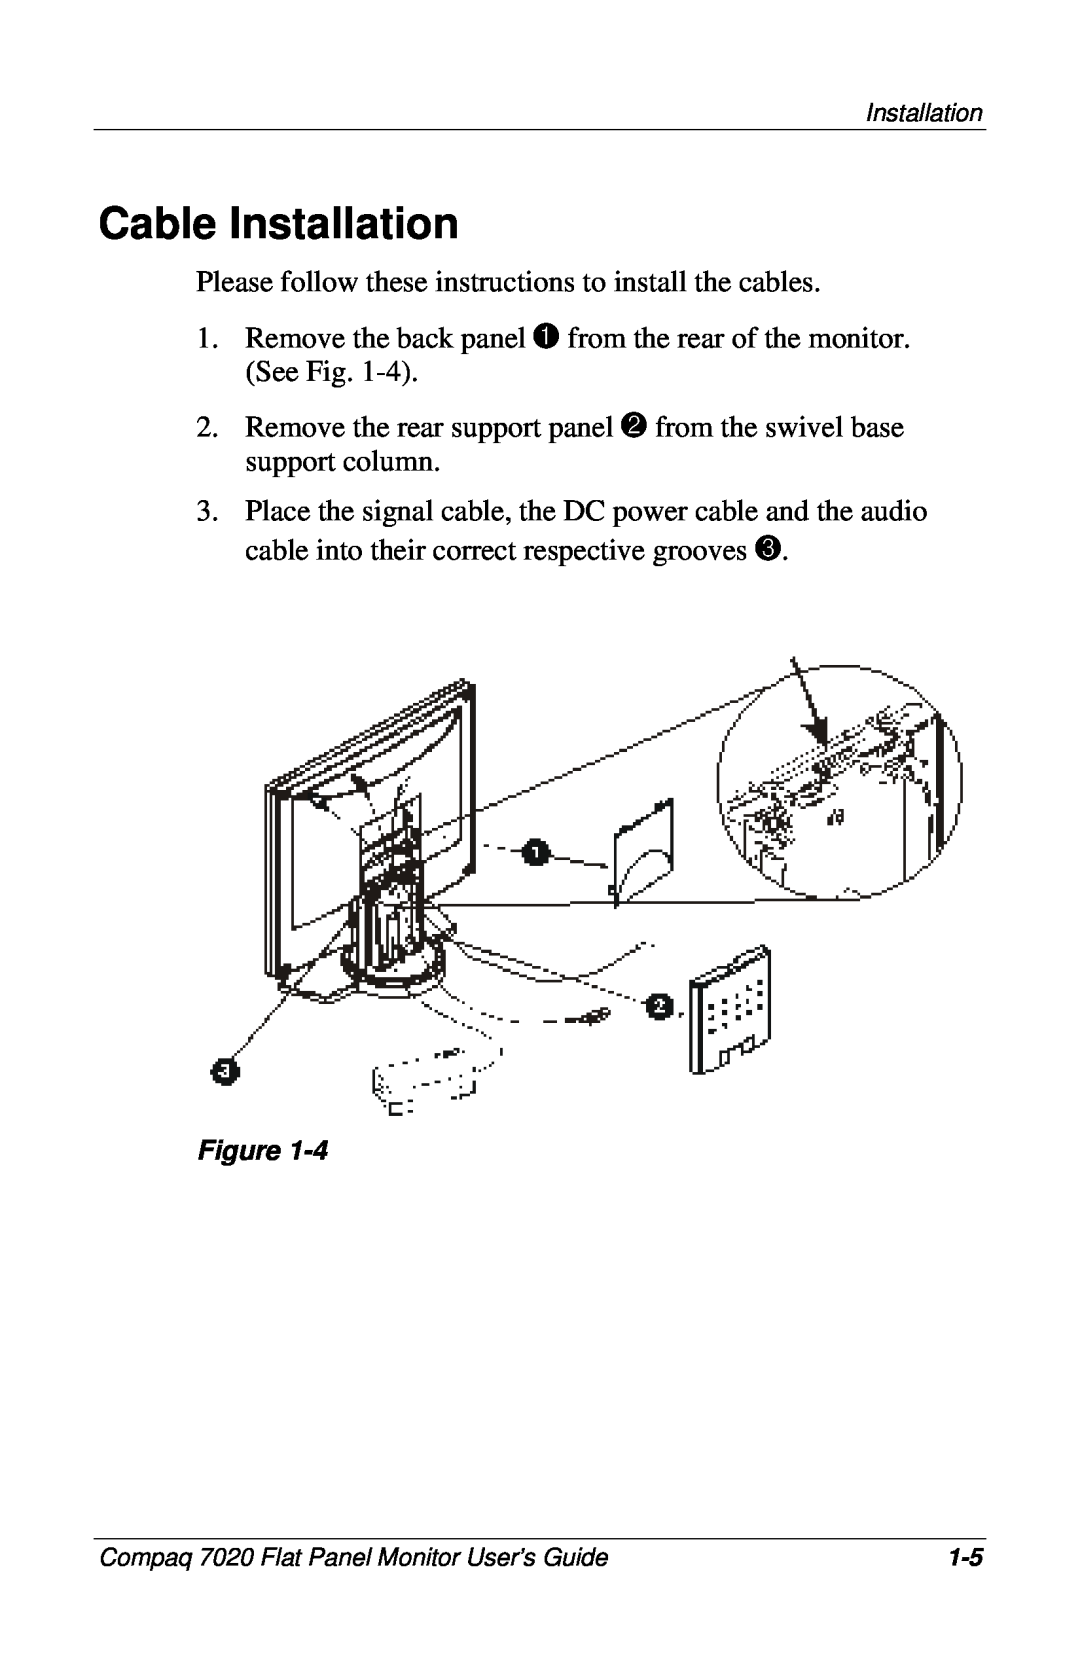 Compaq 7020 manual Cable Installation, Please follow these instructions to install the cables 